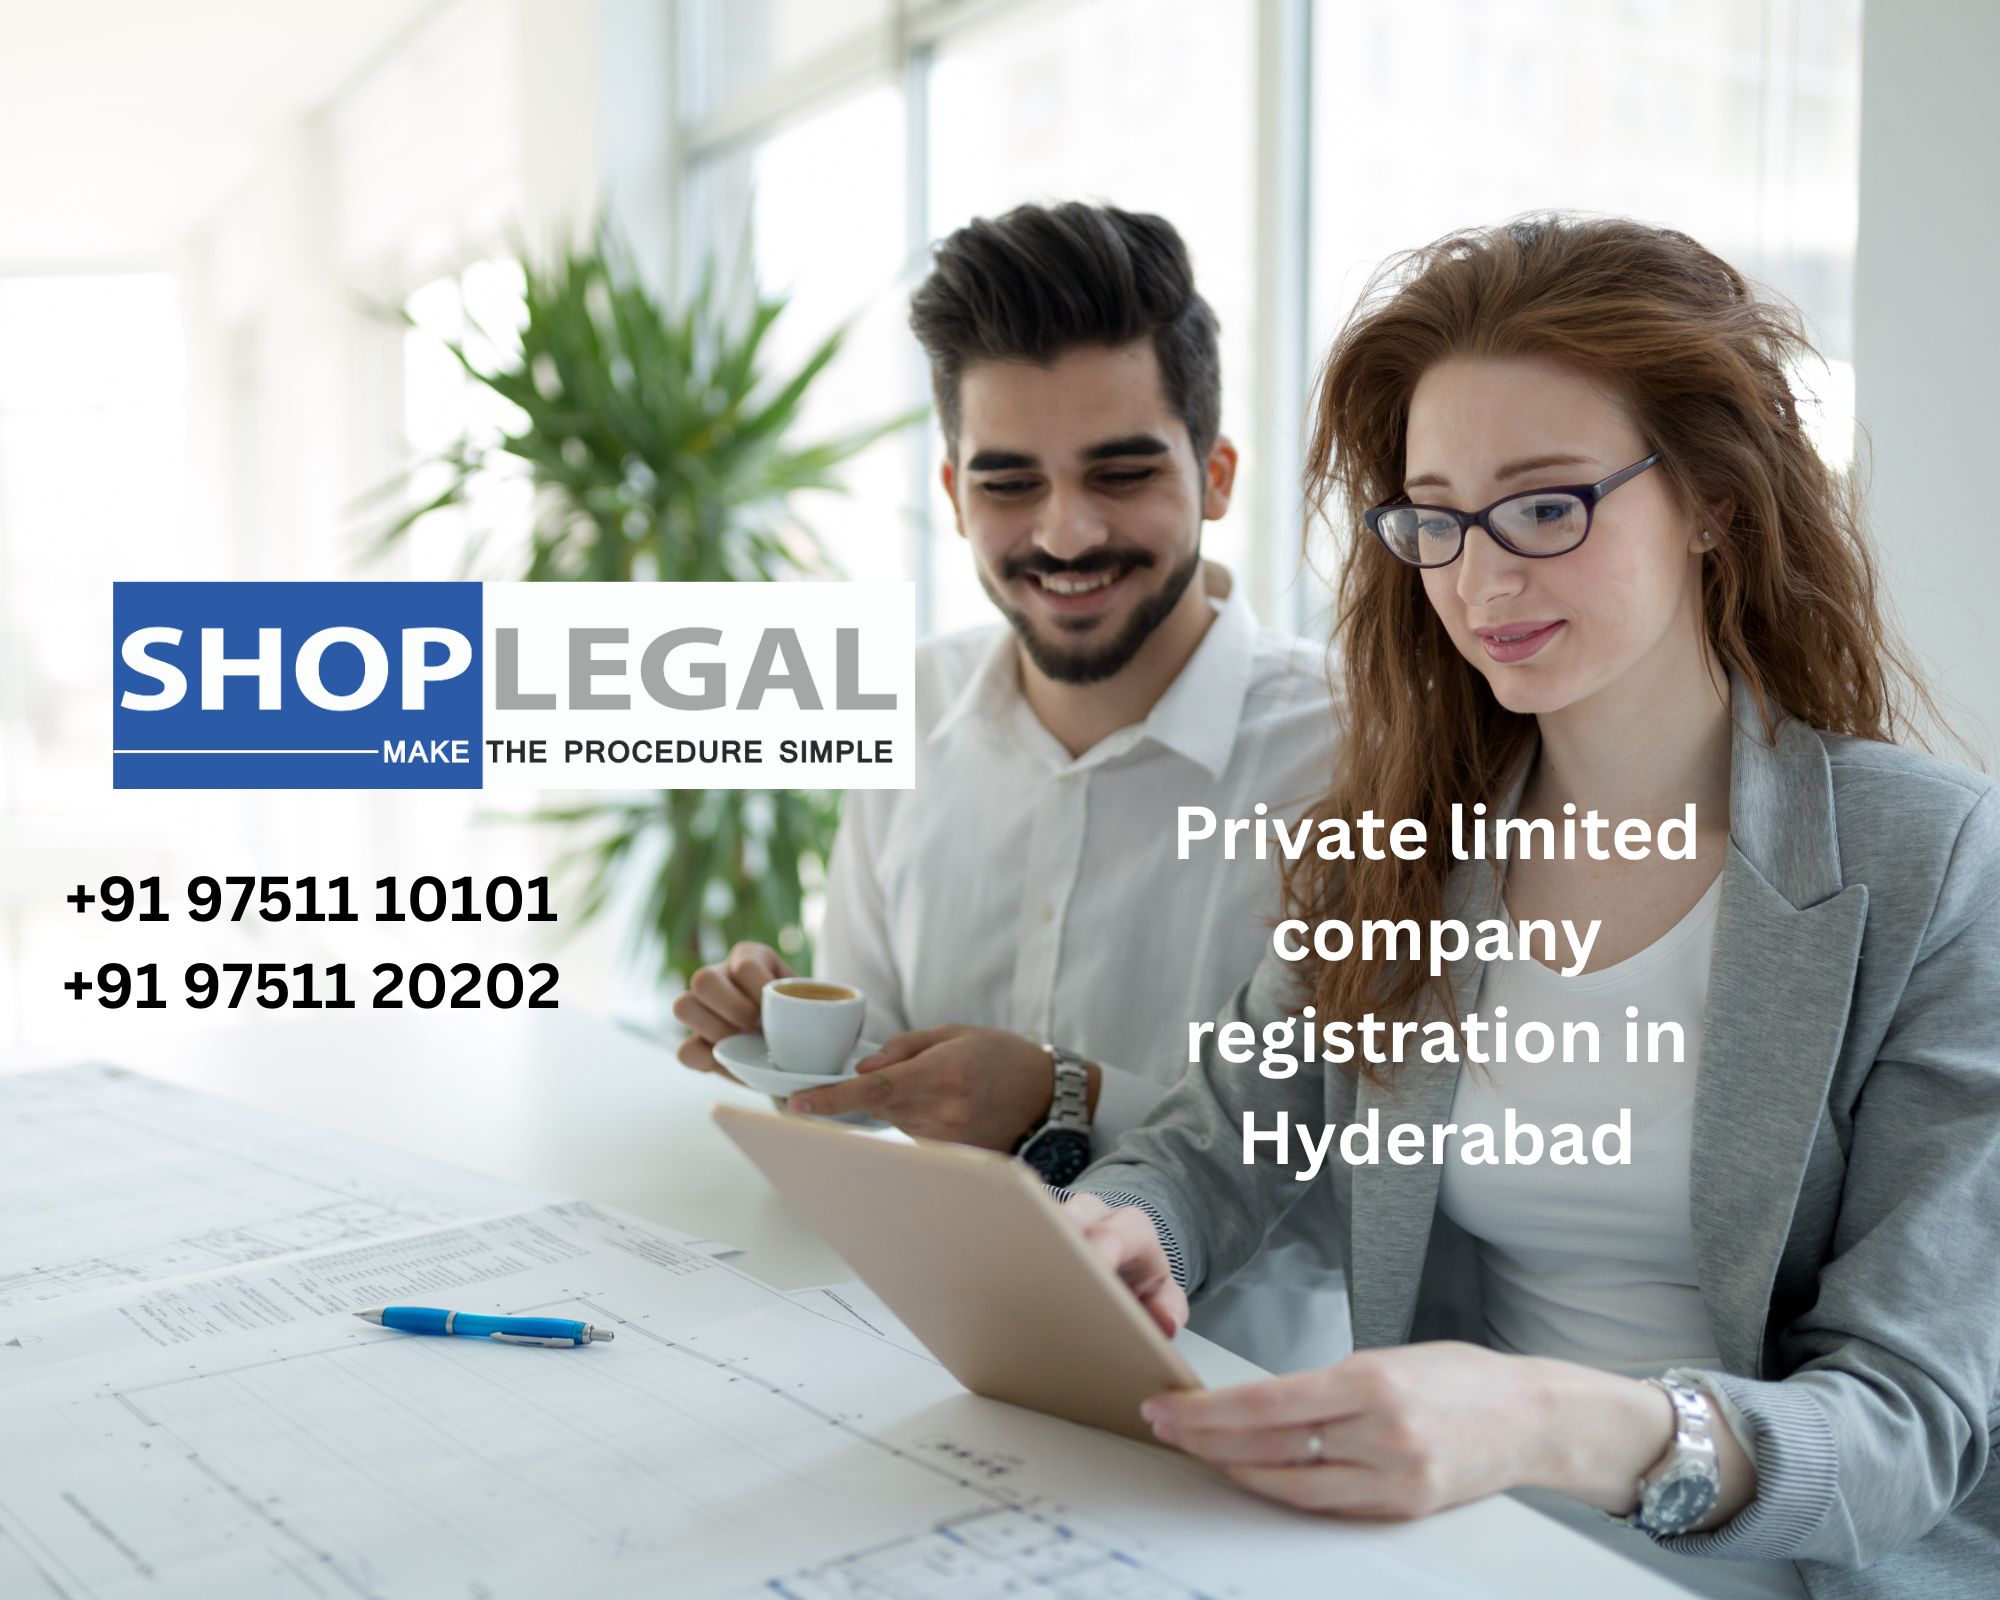 Private limited company registration in Hyderabad